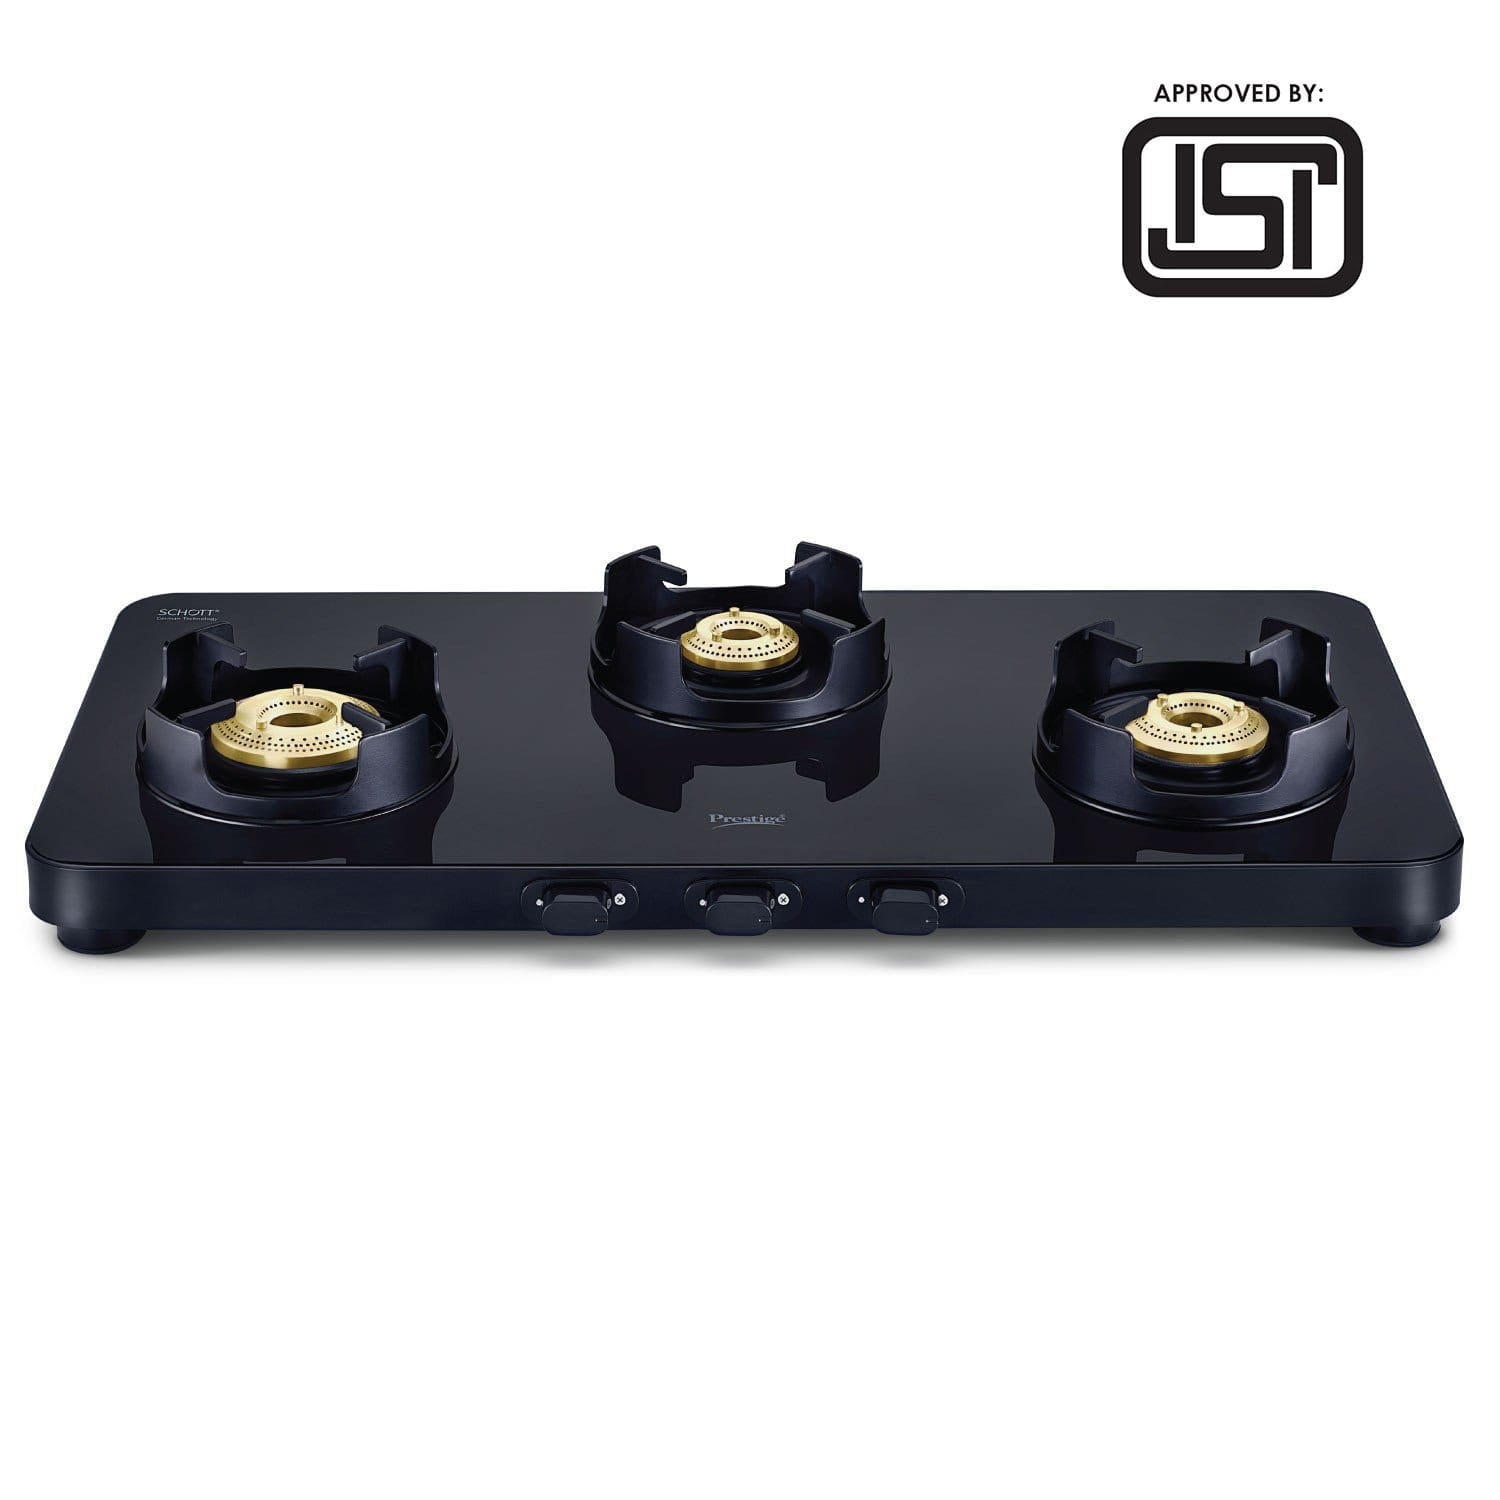 Prestige Edge 3 Burner Glass Gas Stove PEBS 03, Black (ISI Approved) with SCHOTT Glass - KITCHEN MART